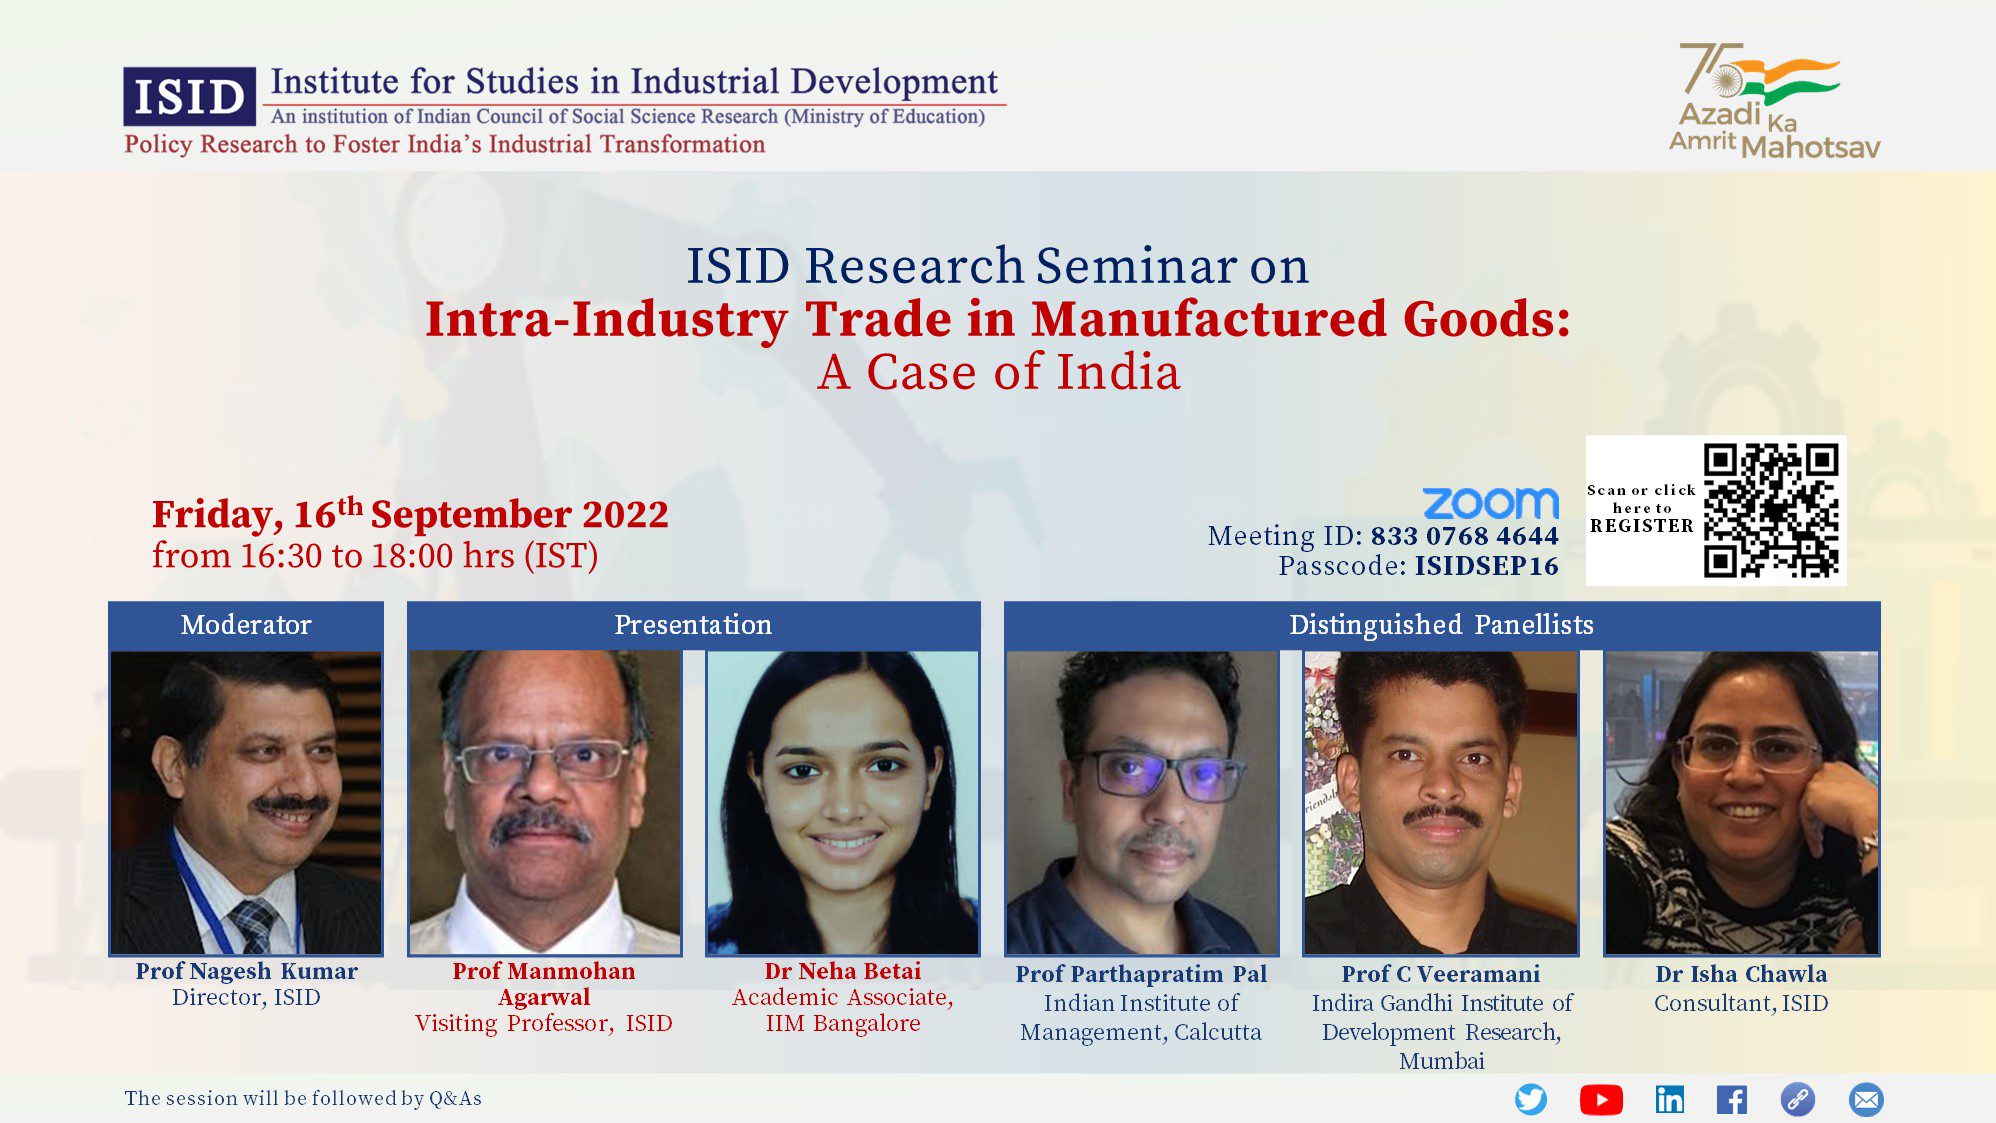 Research Seminar on Intra-Industry Trade in Manufactured Goods: A Case of India